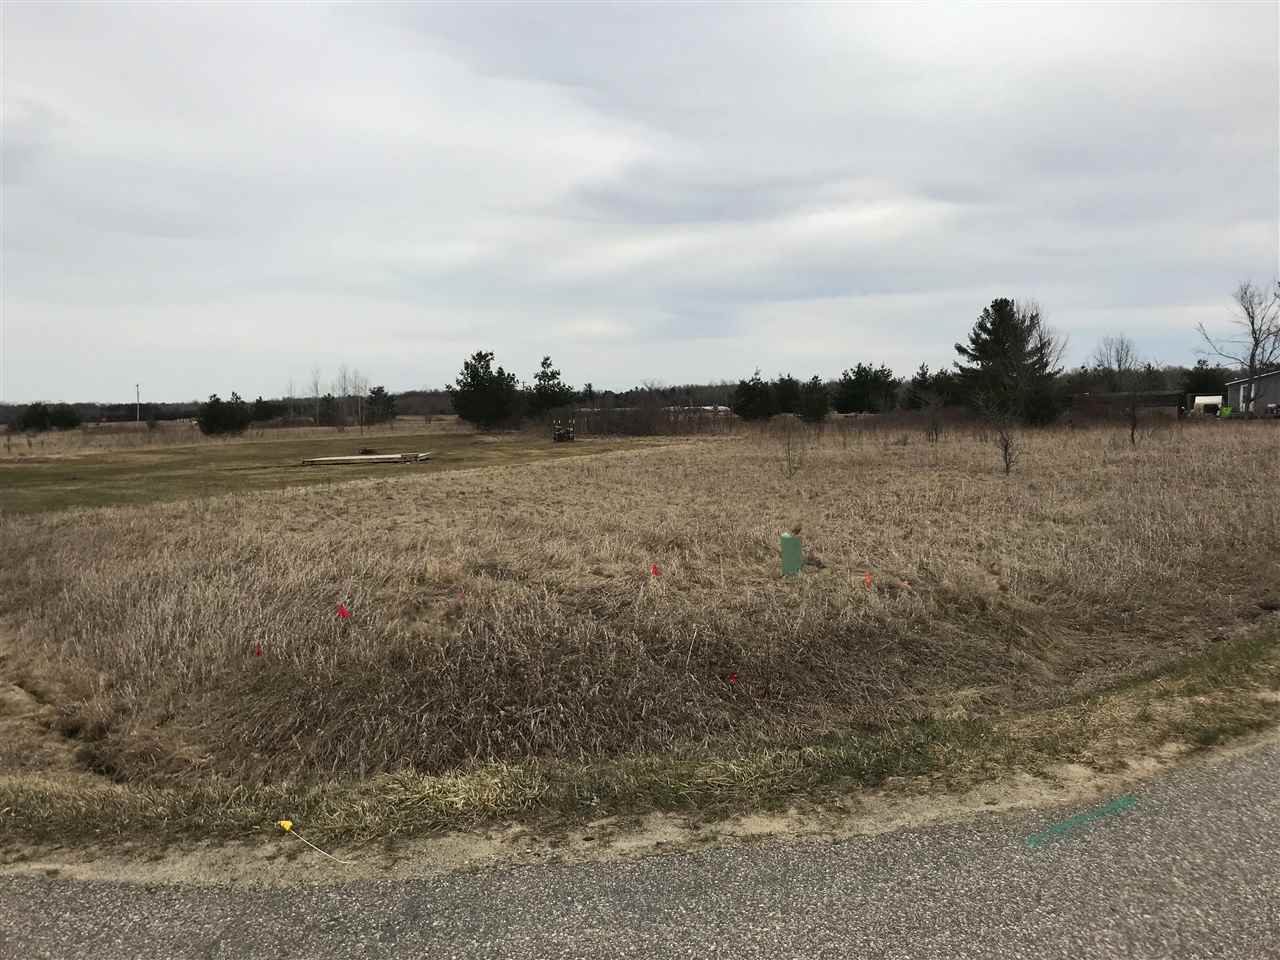 Nice level lot with no clearing required.  Plant trees where you want them. Lot is unimproved and waiting for your specs for camping or building.  Great walking/biking location and short distance to Lake Lancer.   You will be required by Butman Twp to connect to the Sewer system to Camp.  For details and costs, please contact the Sewer Dept 989-426-9955.   Ownership provides access to an 18 hole golf course , restaurant/pub, fitness center, indoor heated pool, tennis/bocce ball courts, chalet/sledding hill, walking (nature) trails, activity bldg, storage area, 2 all sports lakes, Lk Lancer/Lancelot, 15 beach clubs (5 with beach/bath house). Or fly to/from Sugar Springs off a 3500ft well maintained grass airpark.   www.airnav.com   5M6.    ALL just 2-1/2 hours from Detroit!